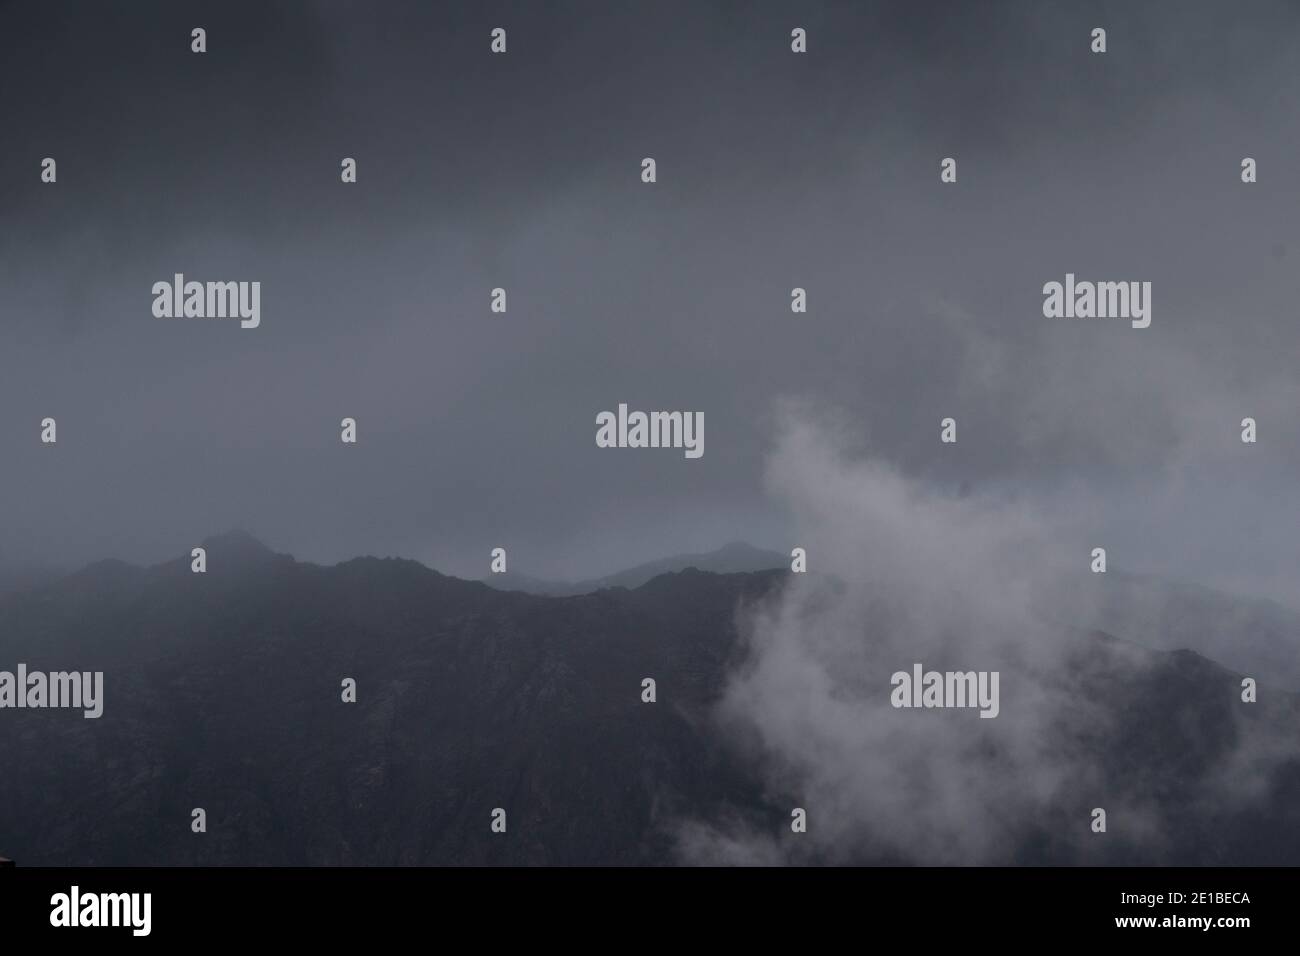 Low clouds lifting up from the mountains in a dark rainy day Stock Photo